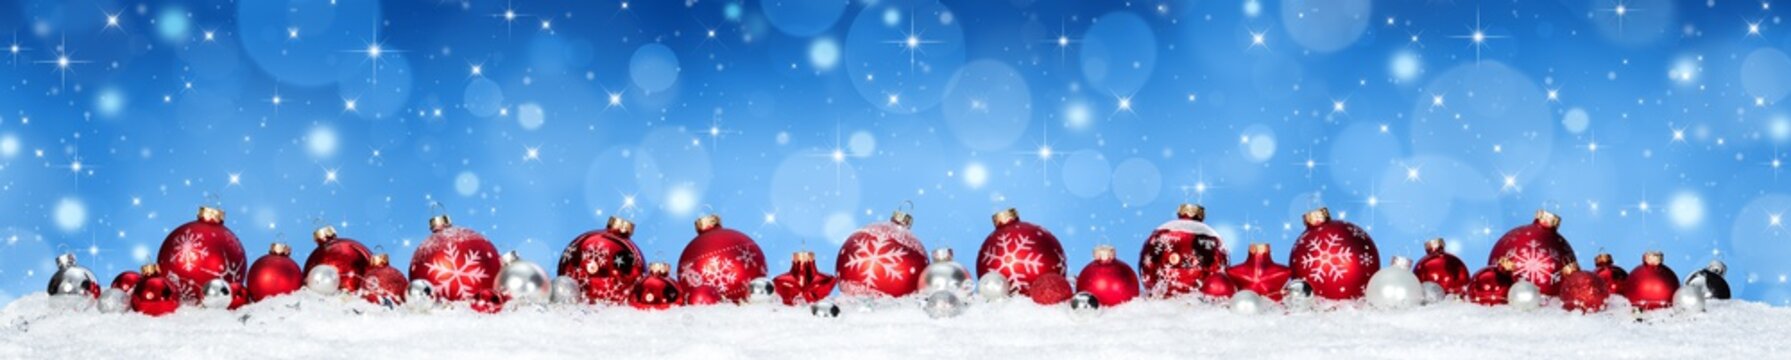 Red Baubles On Snow Whit Snowfall and Blue Heaven - Christmas Banner
